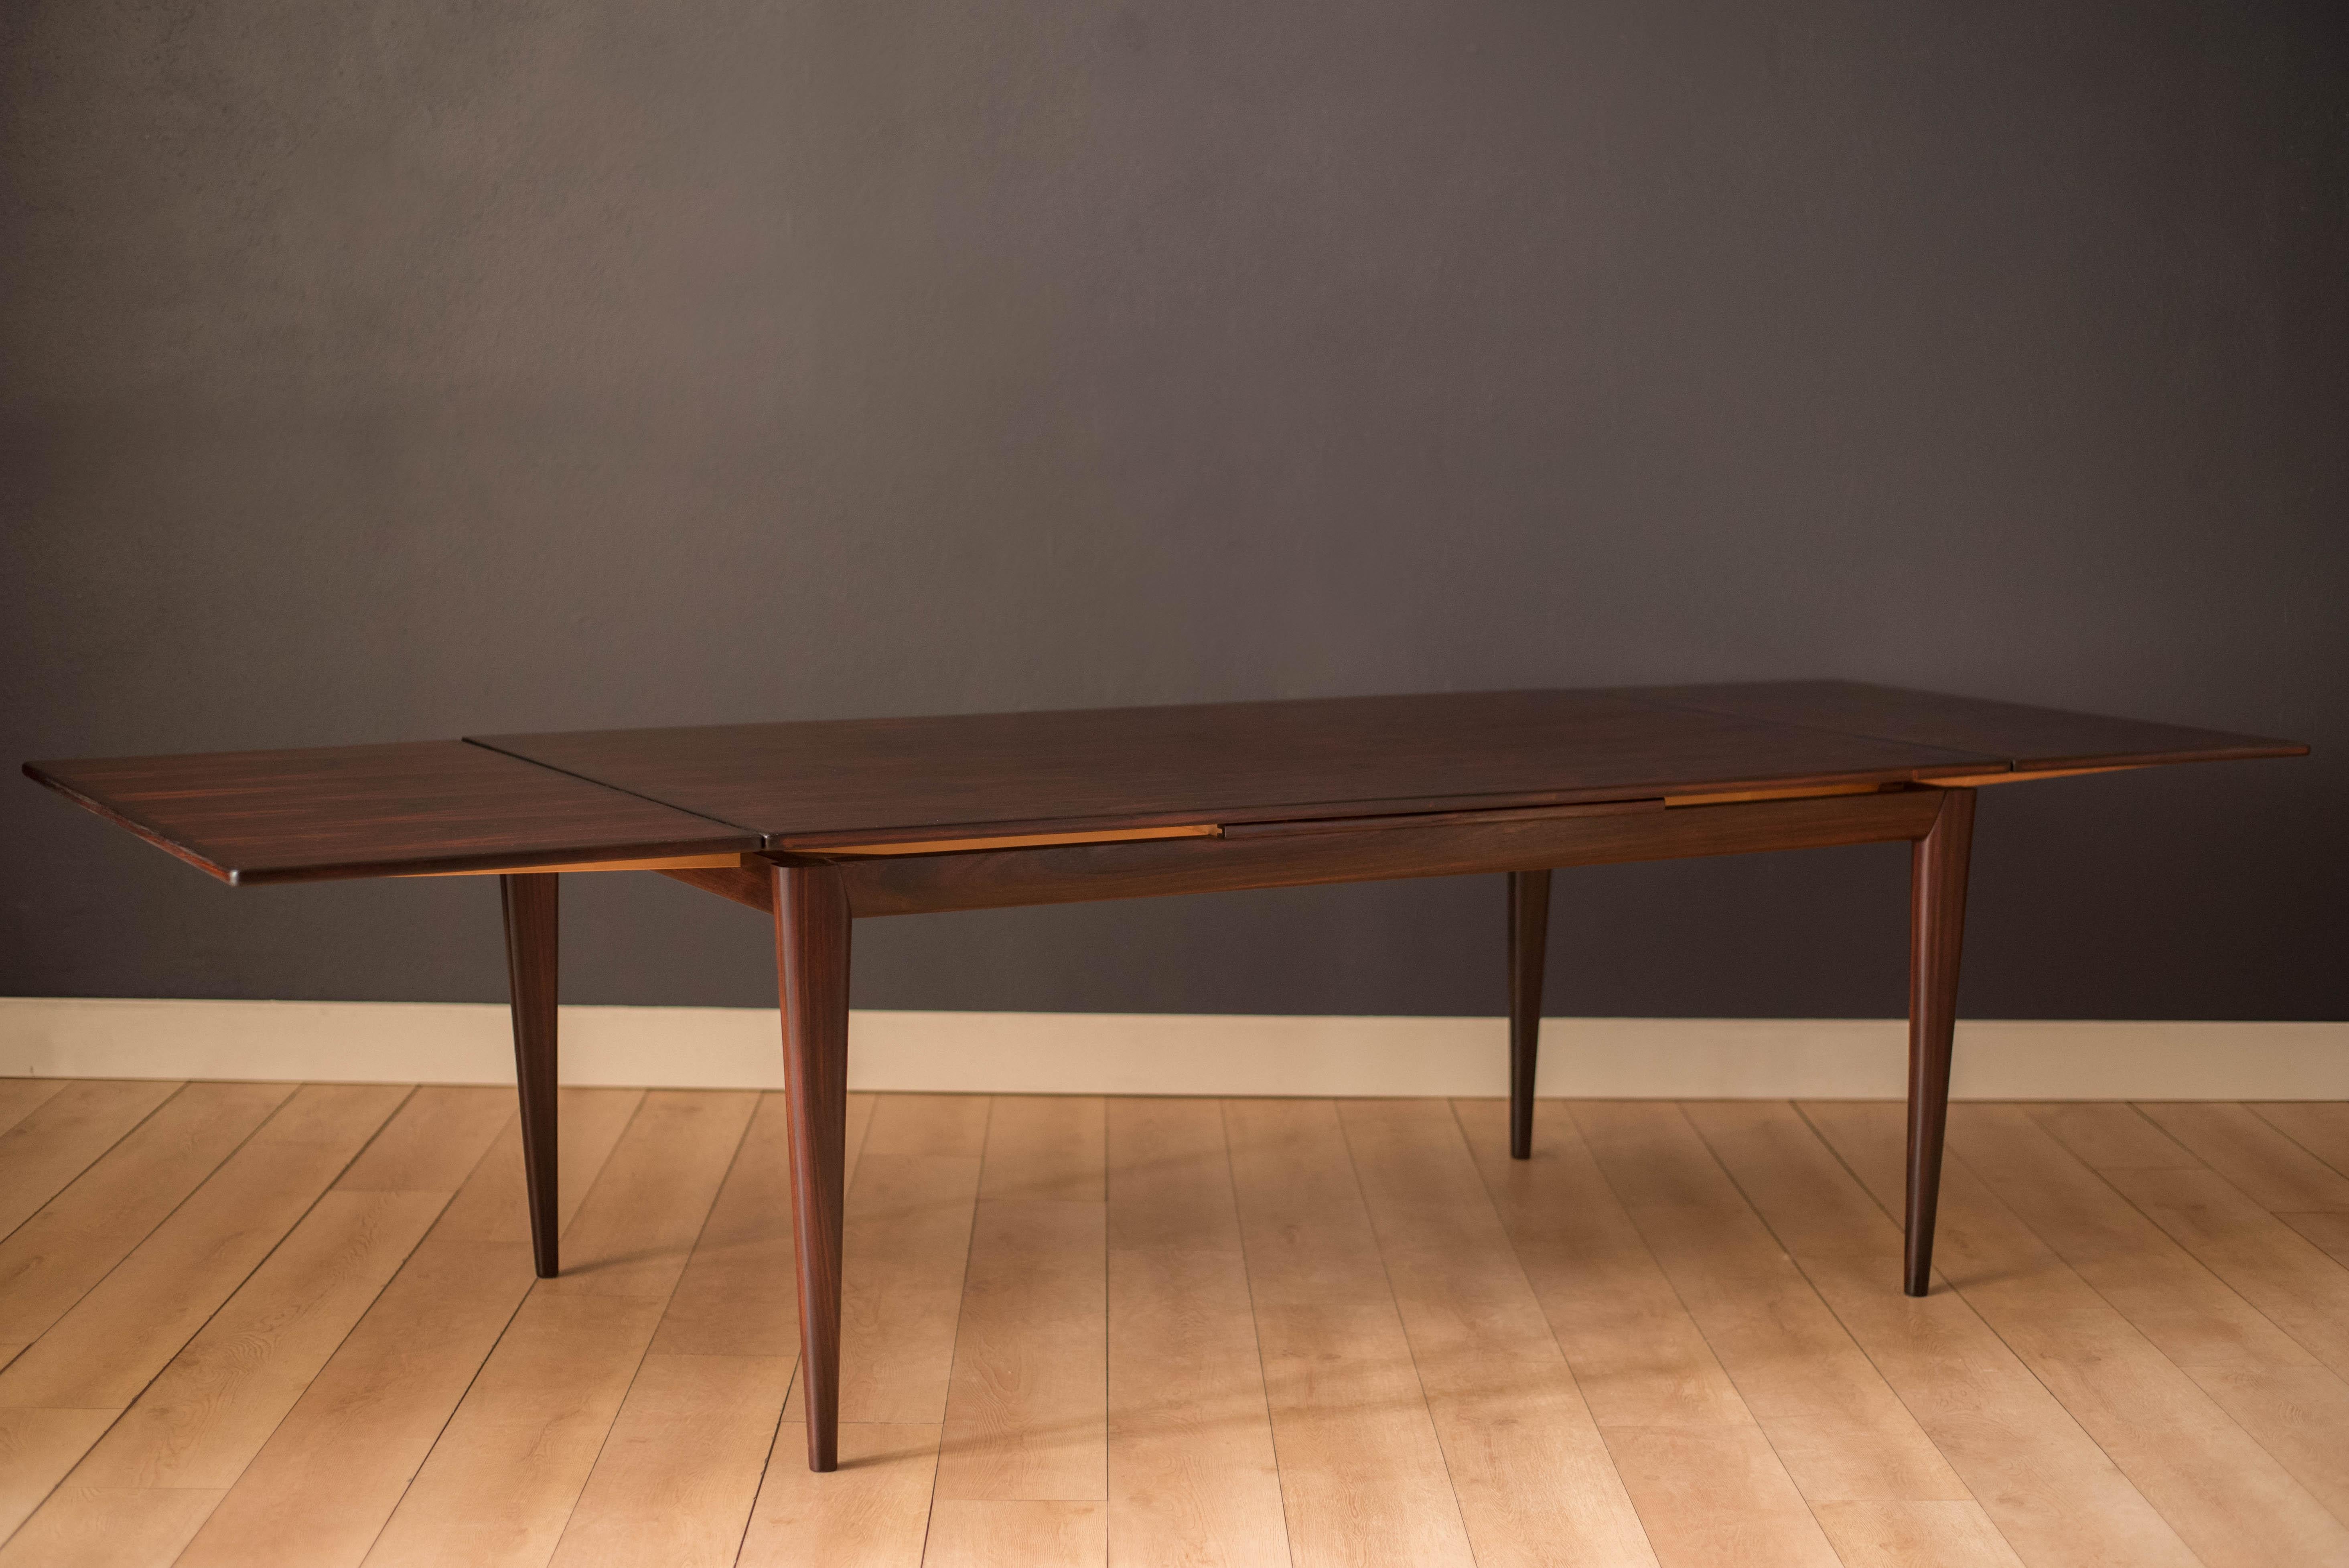 Mid-Century Modern extension dining table designed by Niels Otto Møller for J.L. Møllers Møbelfabrik, Denmark. Features a stunning display of rich rosewood grains supported by thick tapered legs. This piece offers two draw leaf extensions that